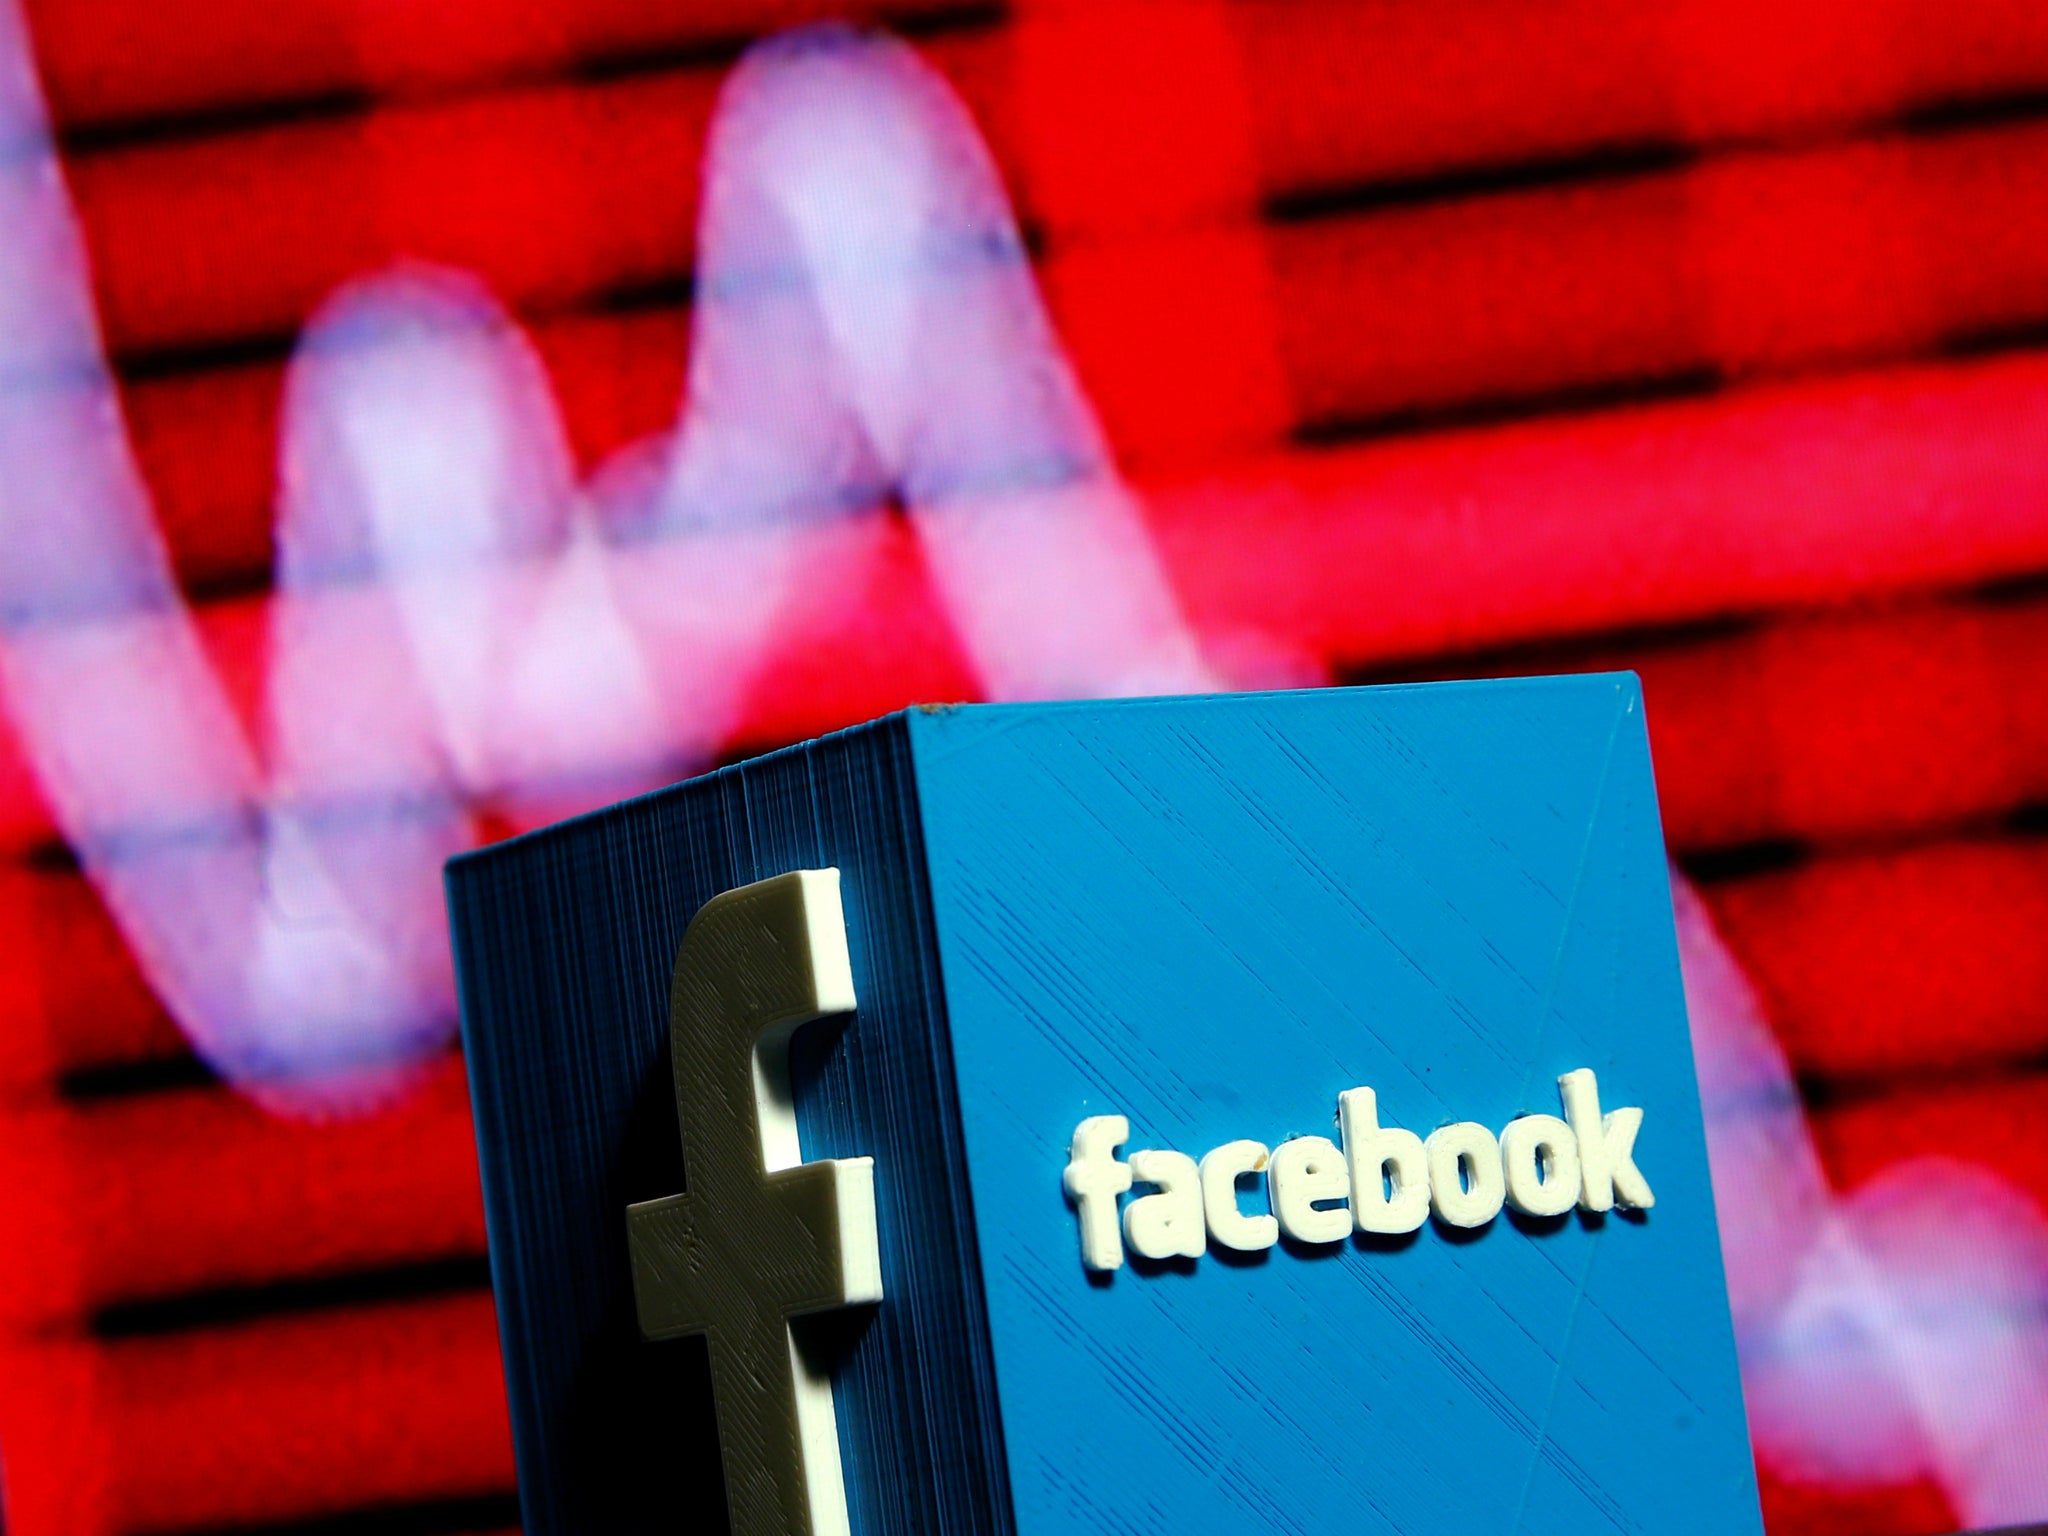 Police have not yet obtained the footage of the alleged rape, but Facebook is said to be helping to retrieve it